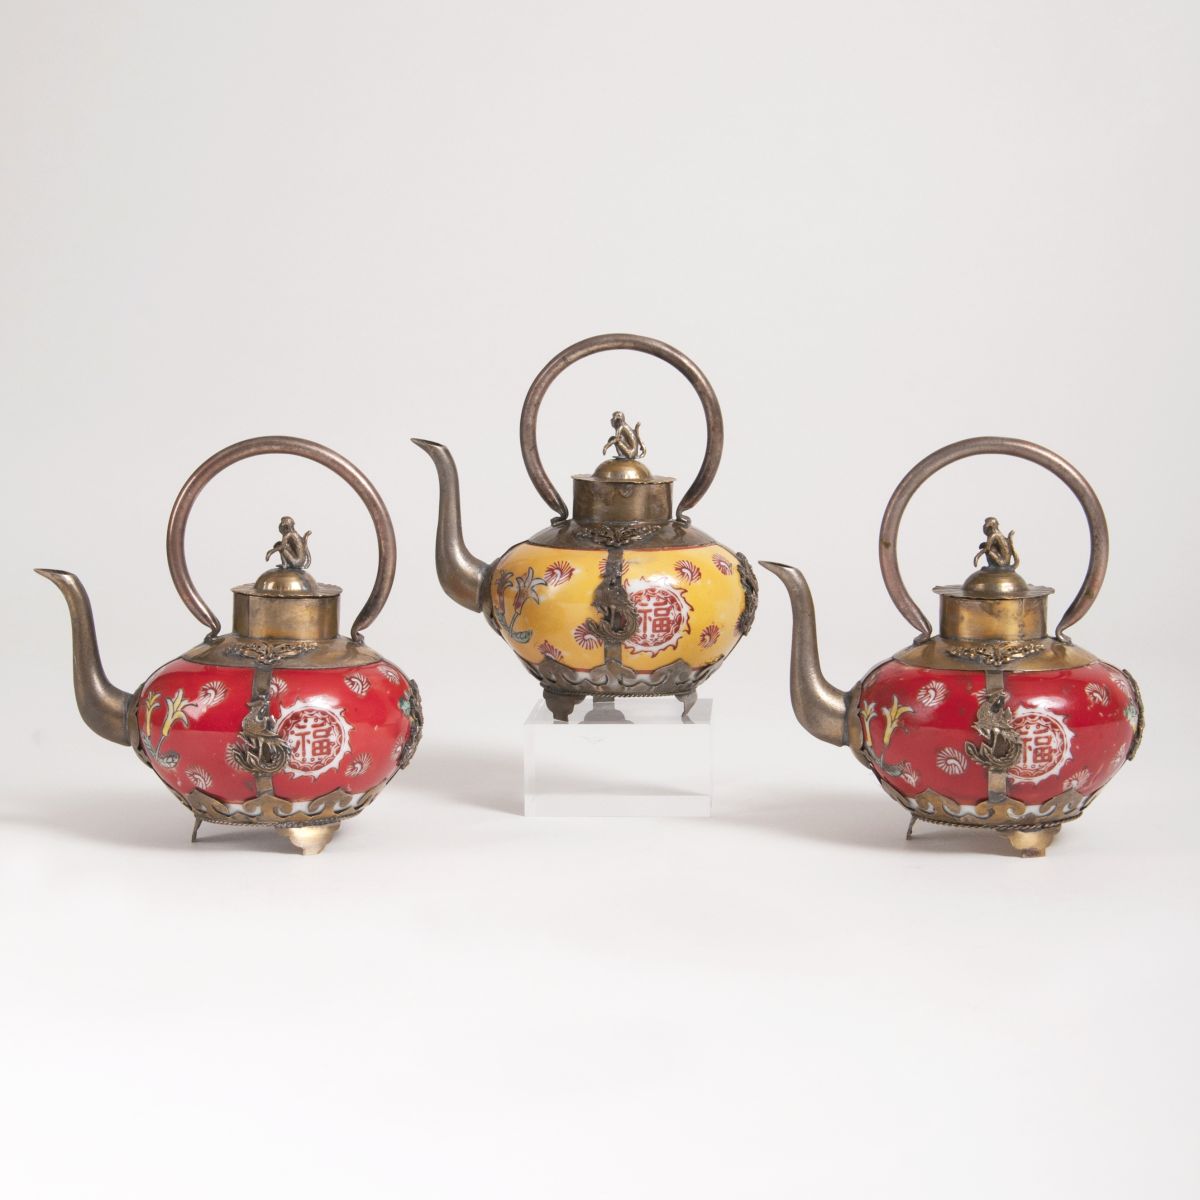 A set of 3 small Chinese Teapots